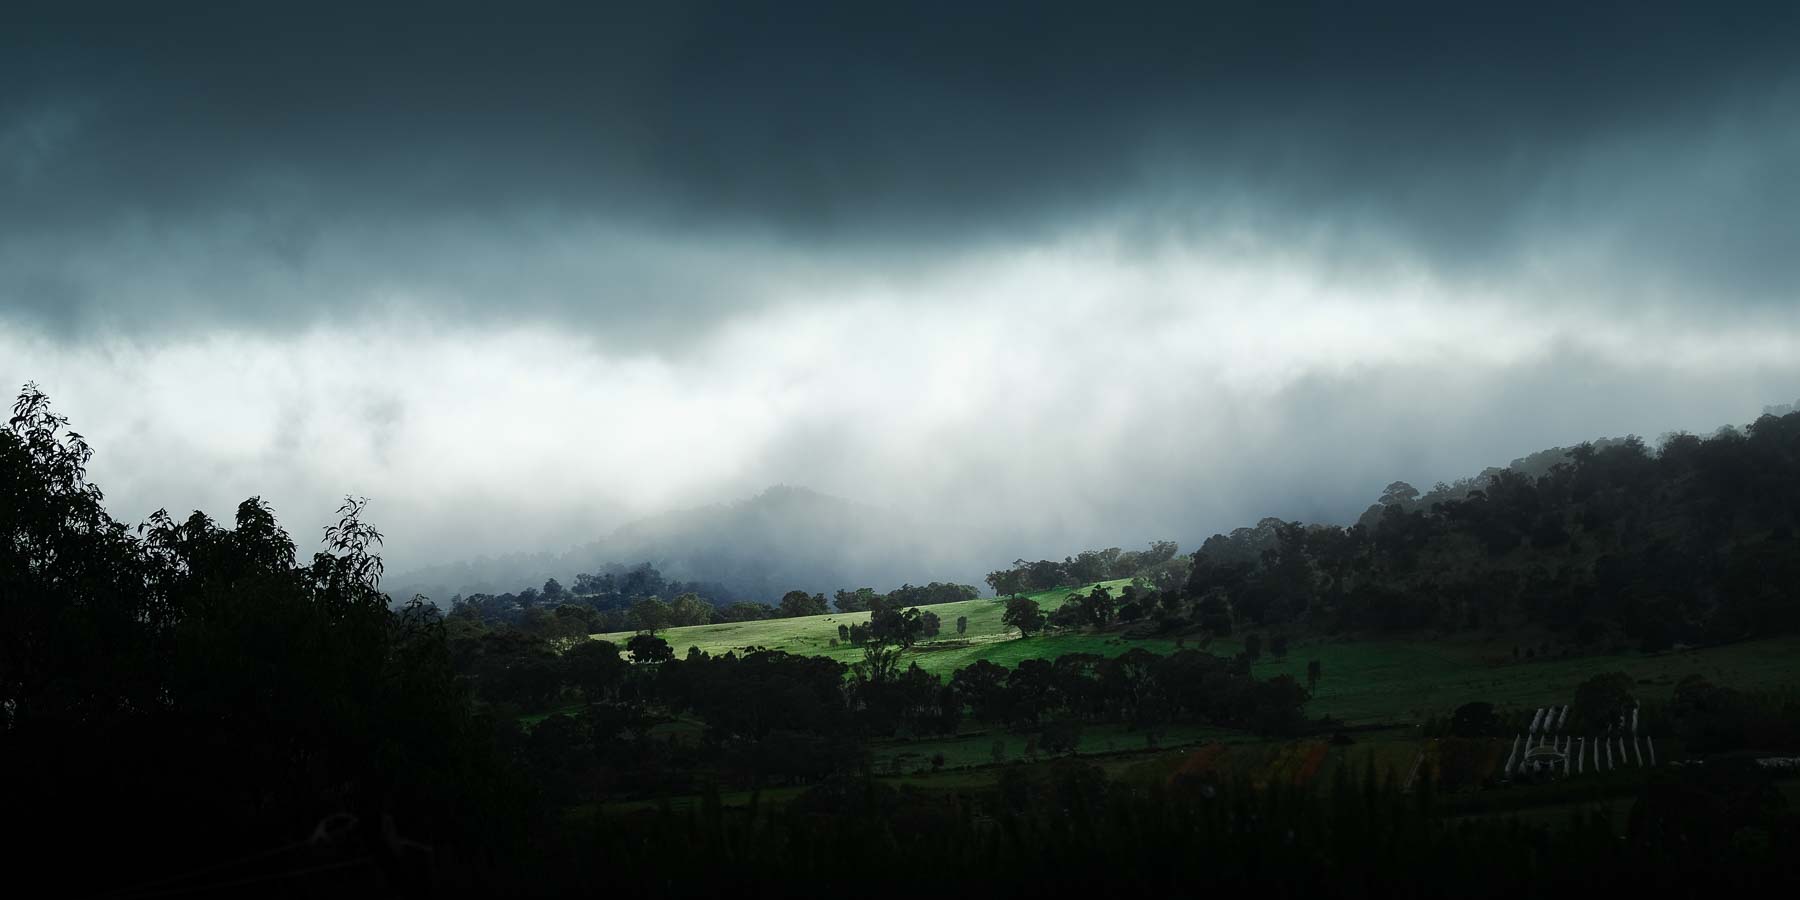 Moody landscape photographed from Faraday